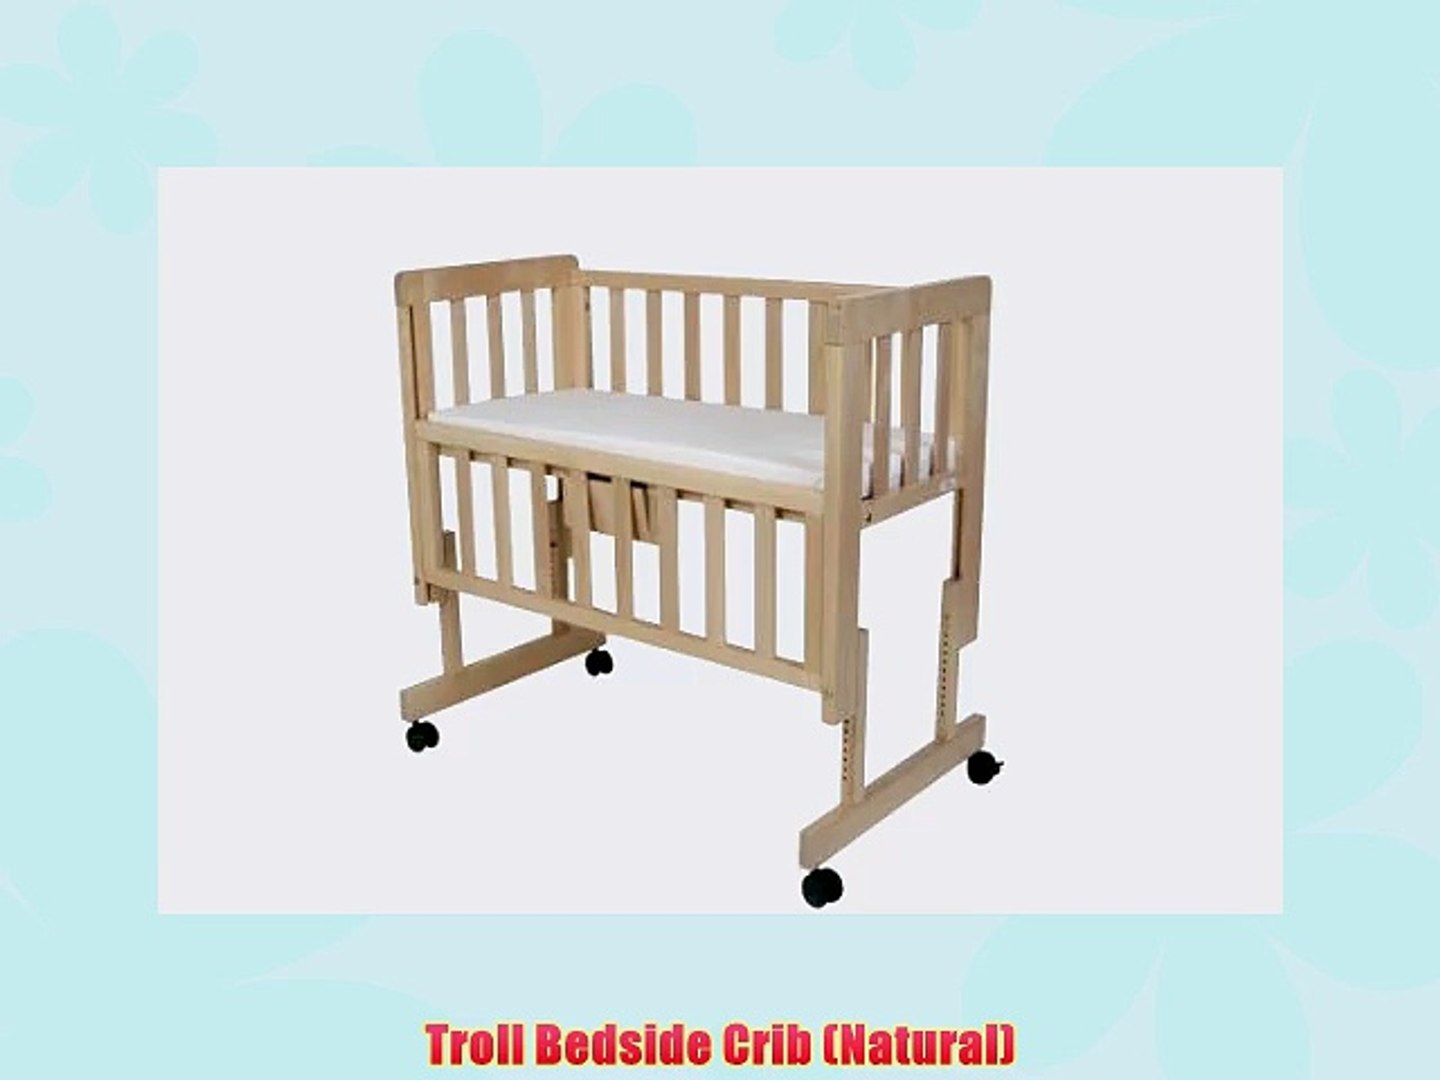 Troll Bedside Crib (Natural) - video Dailymotion